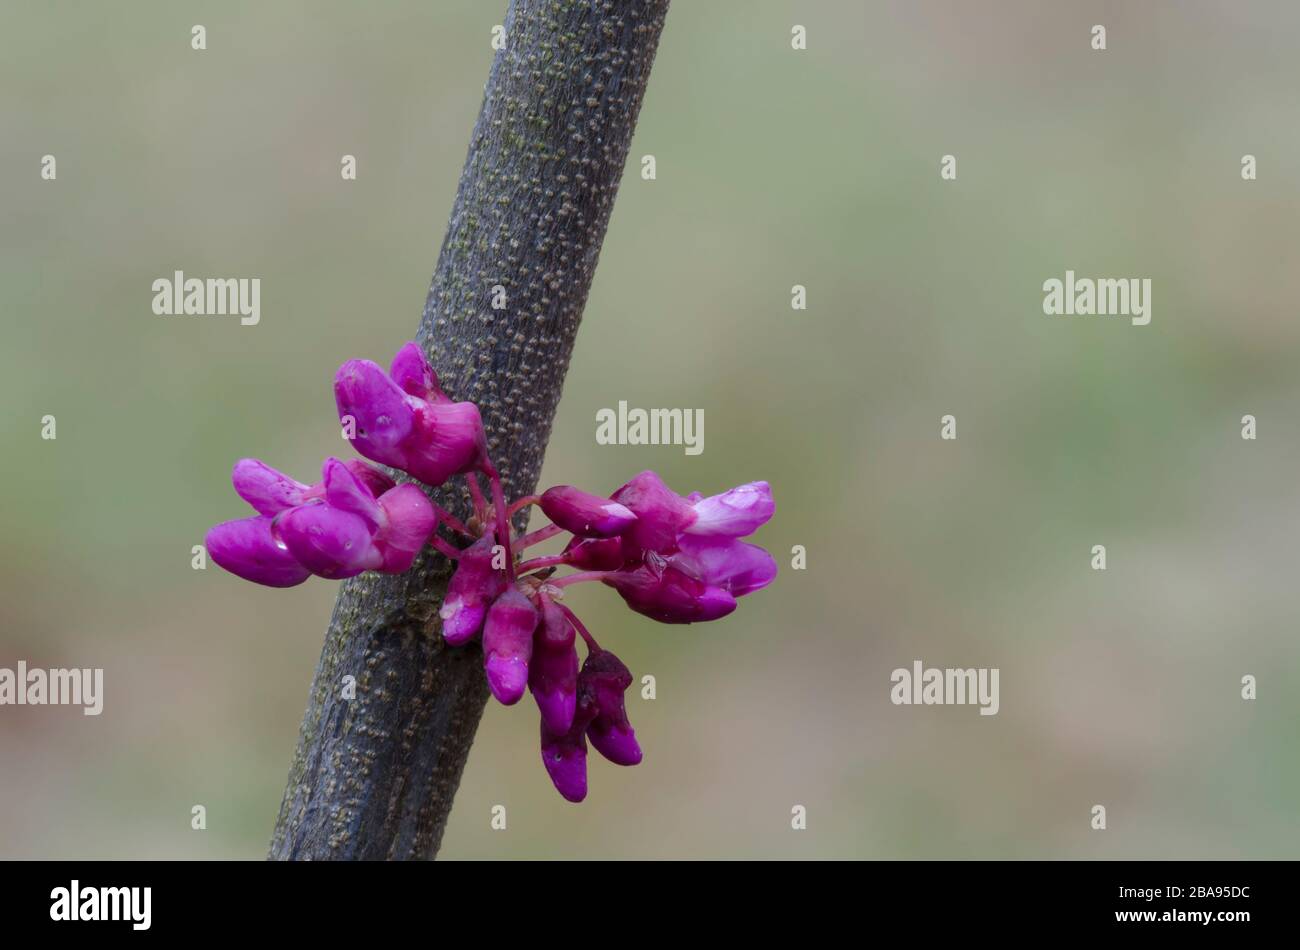 Eastern Redbud, Cercis canadensis, blossoms Stock Photo